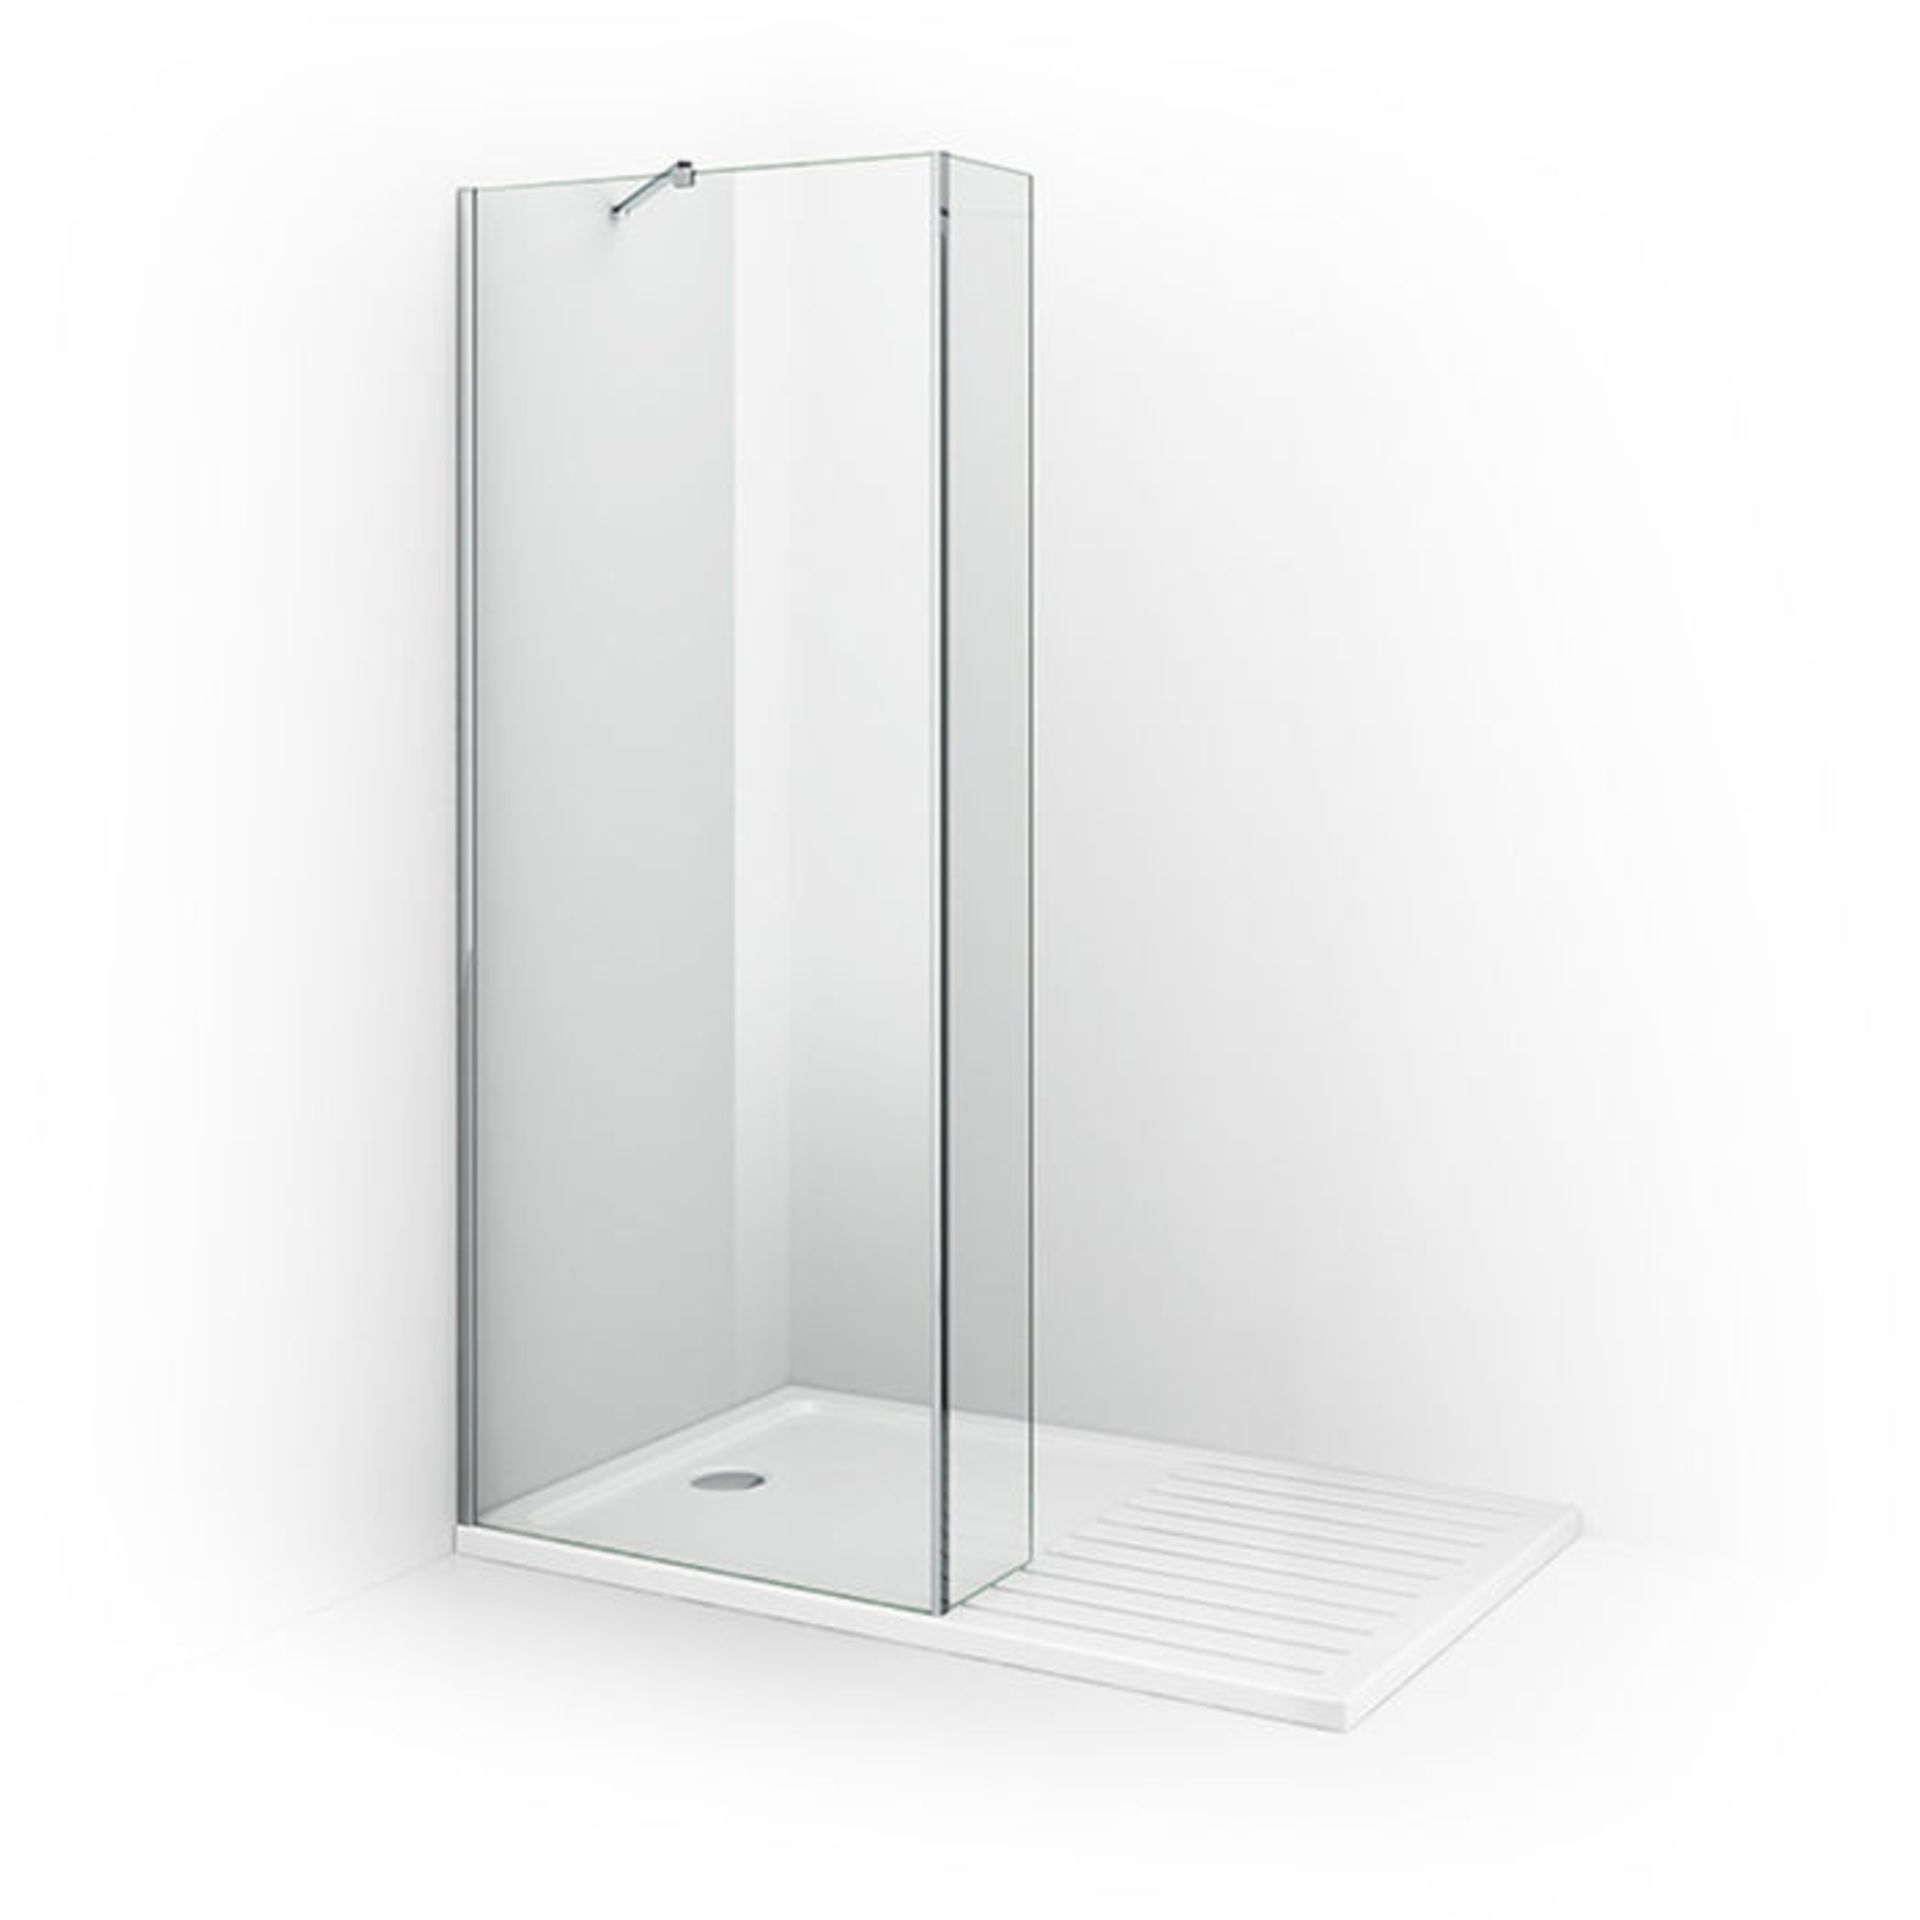 (TP69) 1400x800mm Rectangular Walk In Shower Tray. Strong & Slimline low profile design - - Image 3 of 3